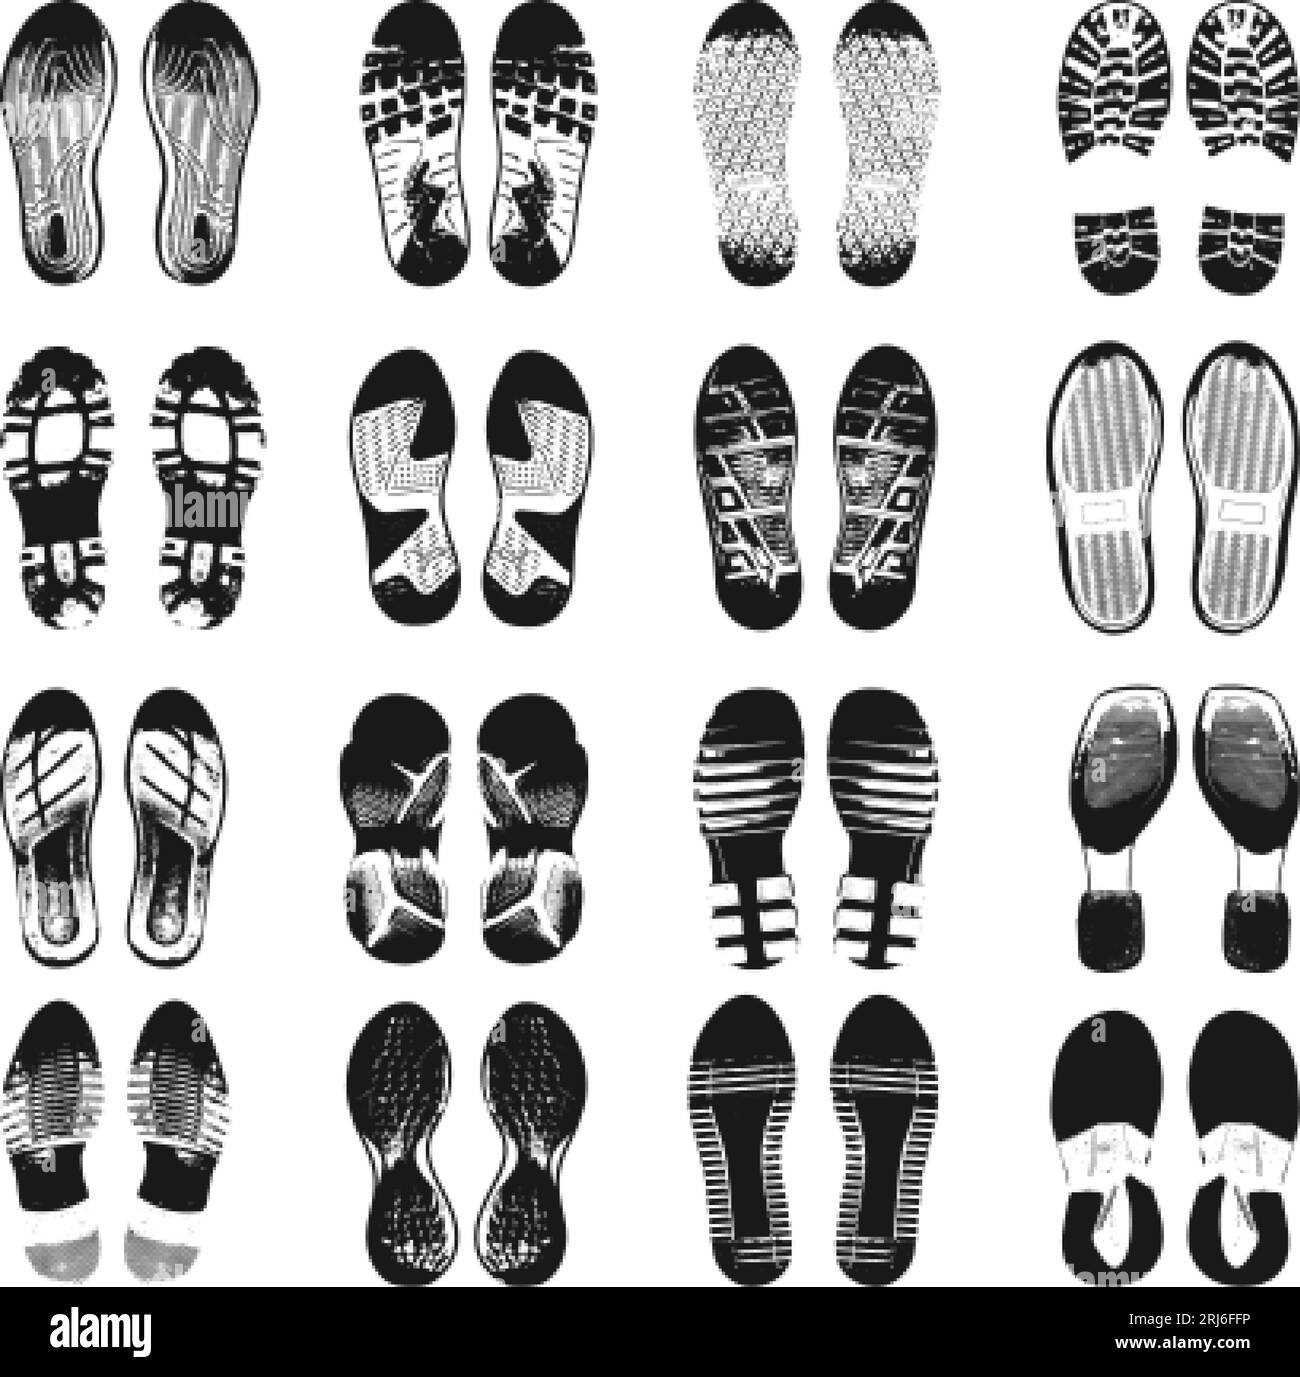 Human foot steps barefoot and in shoes. Black dirty footprints silhouettes, boot and sneakers print. Isolated footstep icons neoteric vector set Stock Vector